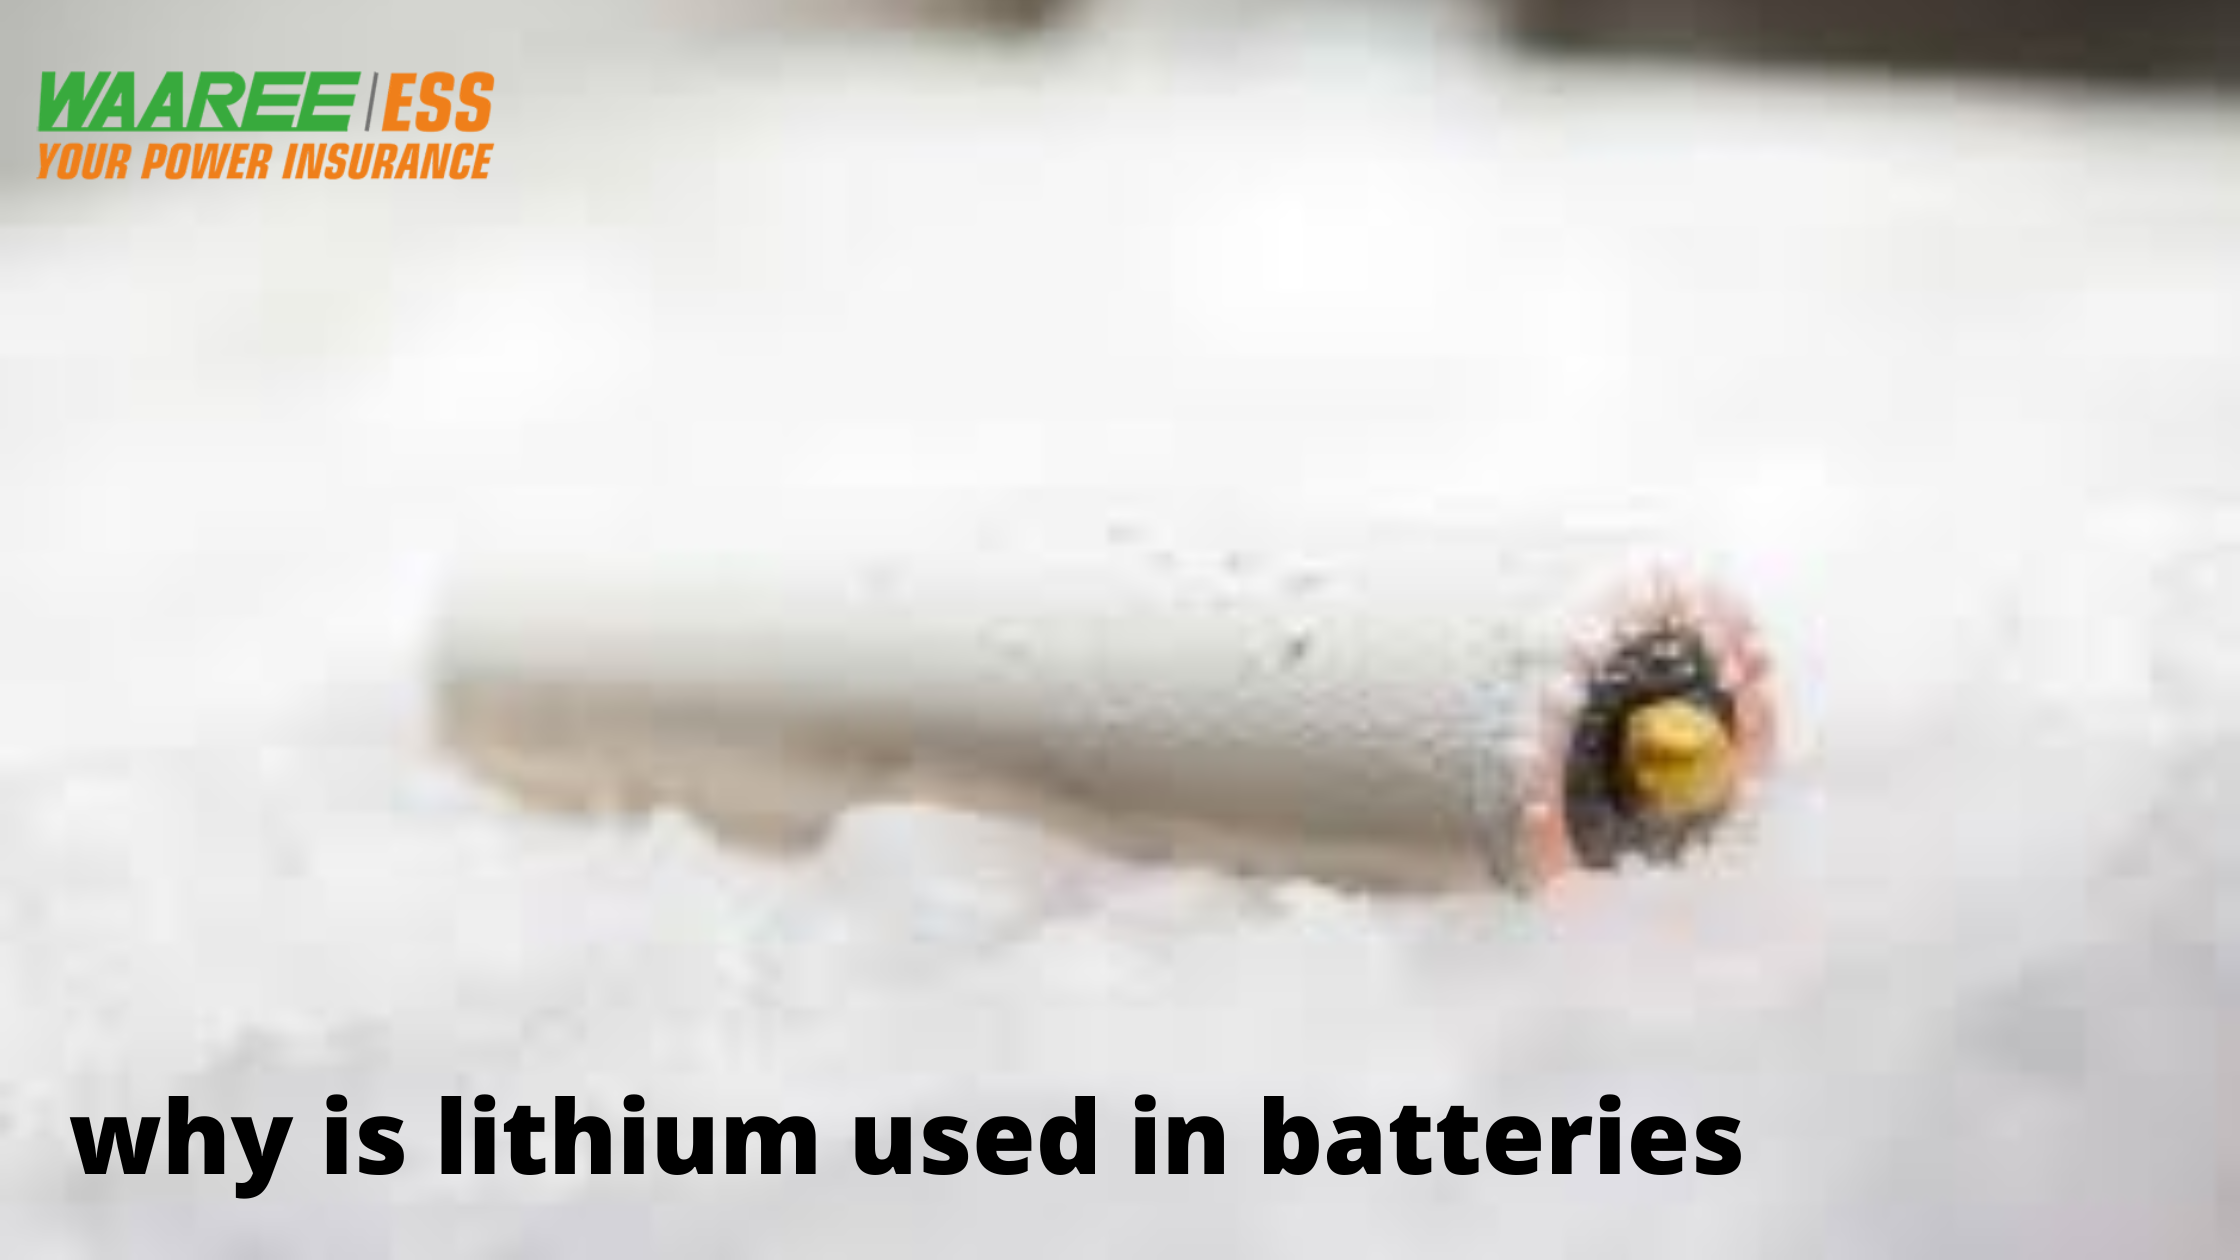 lithium ion cell, lithium is used in batteries